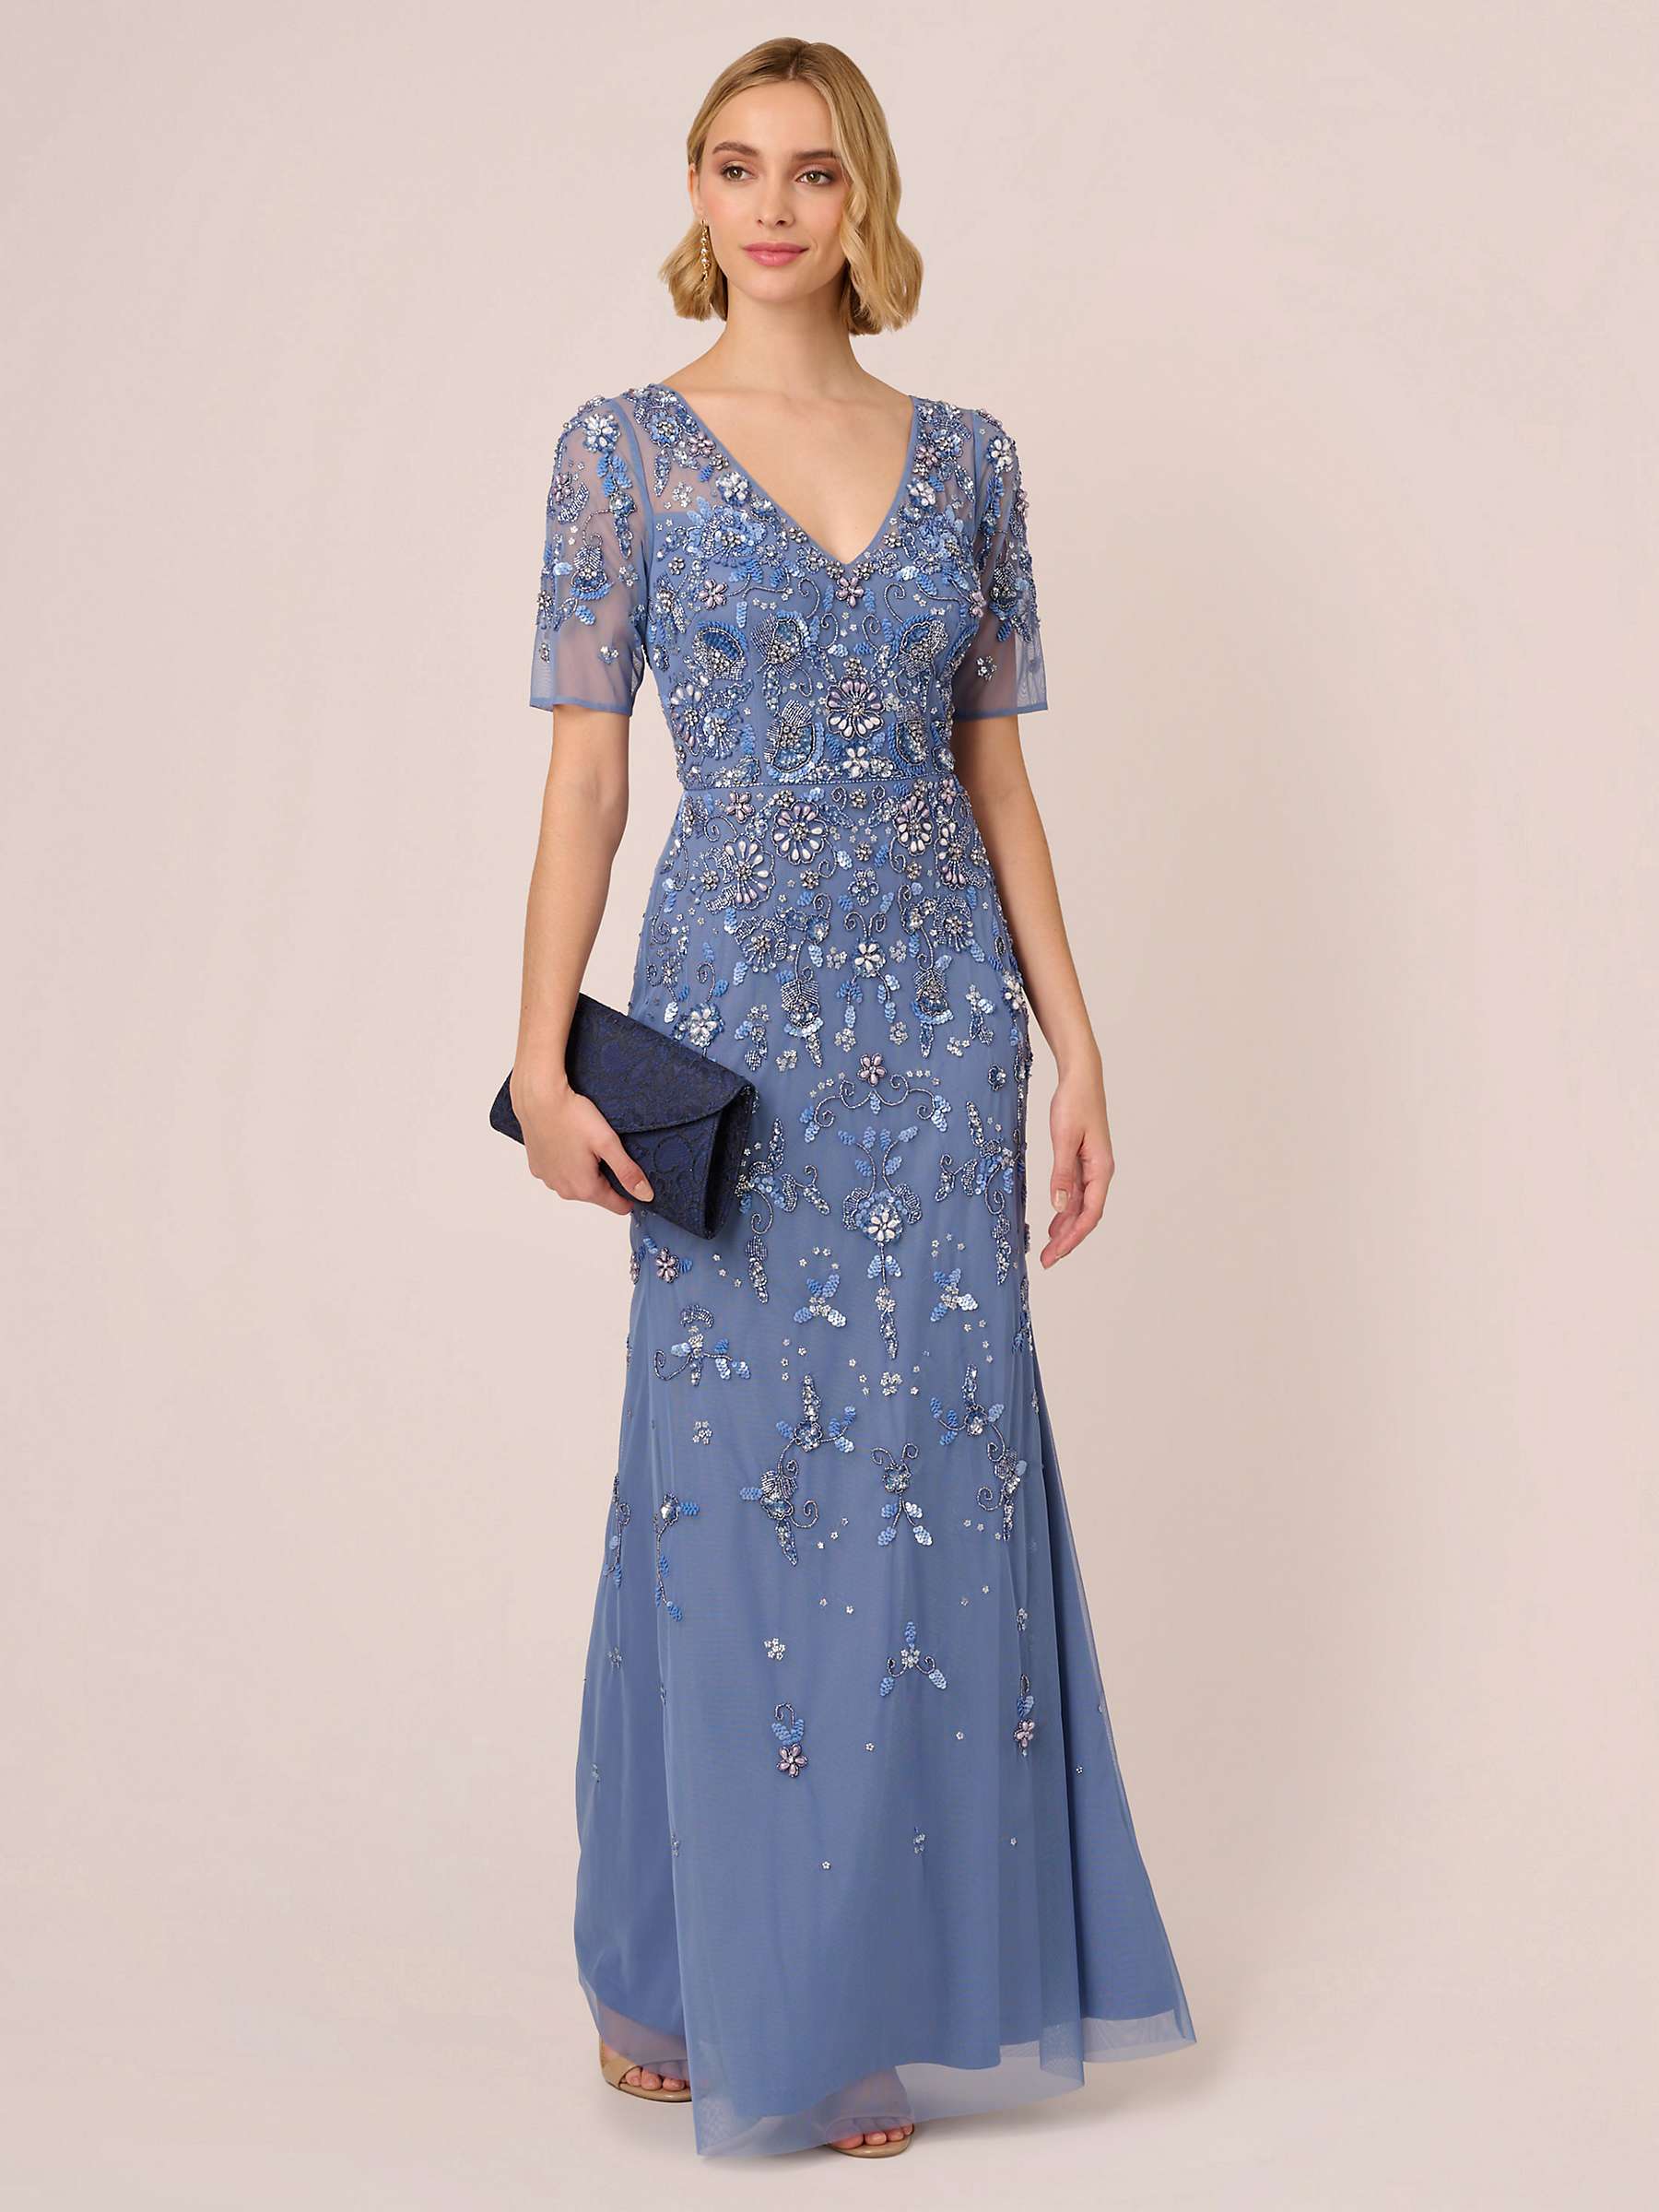 Buy Adrianna Papell Beaded Mesh Maxi Dress, French Blue Online at johnlewis.com